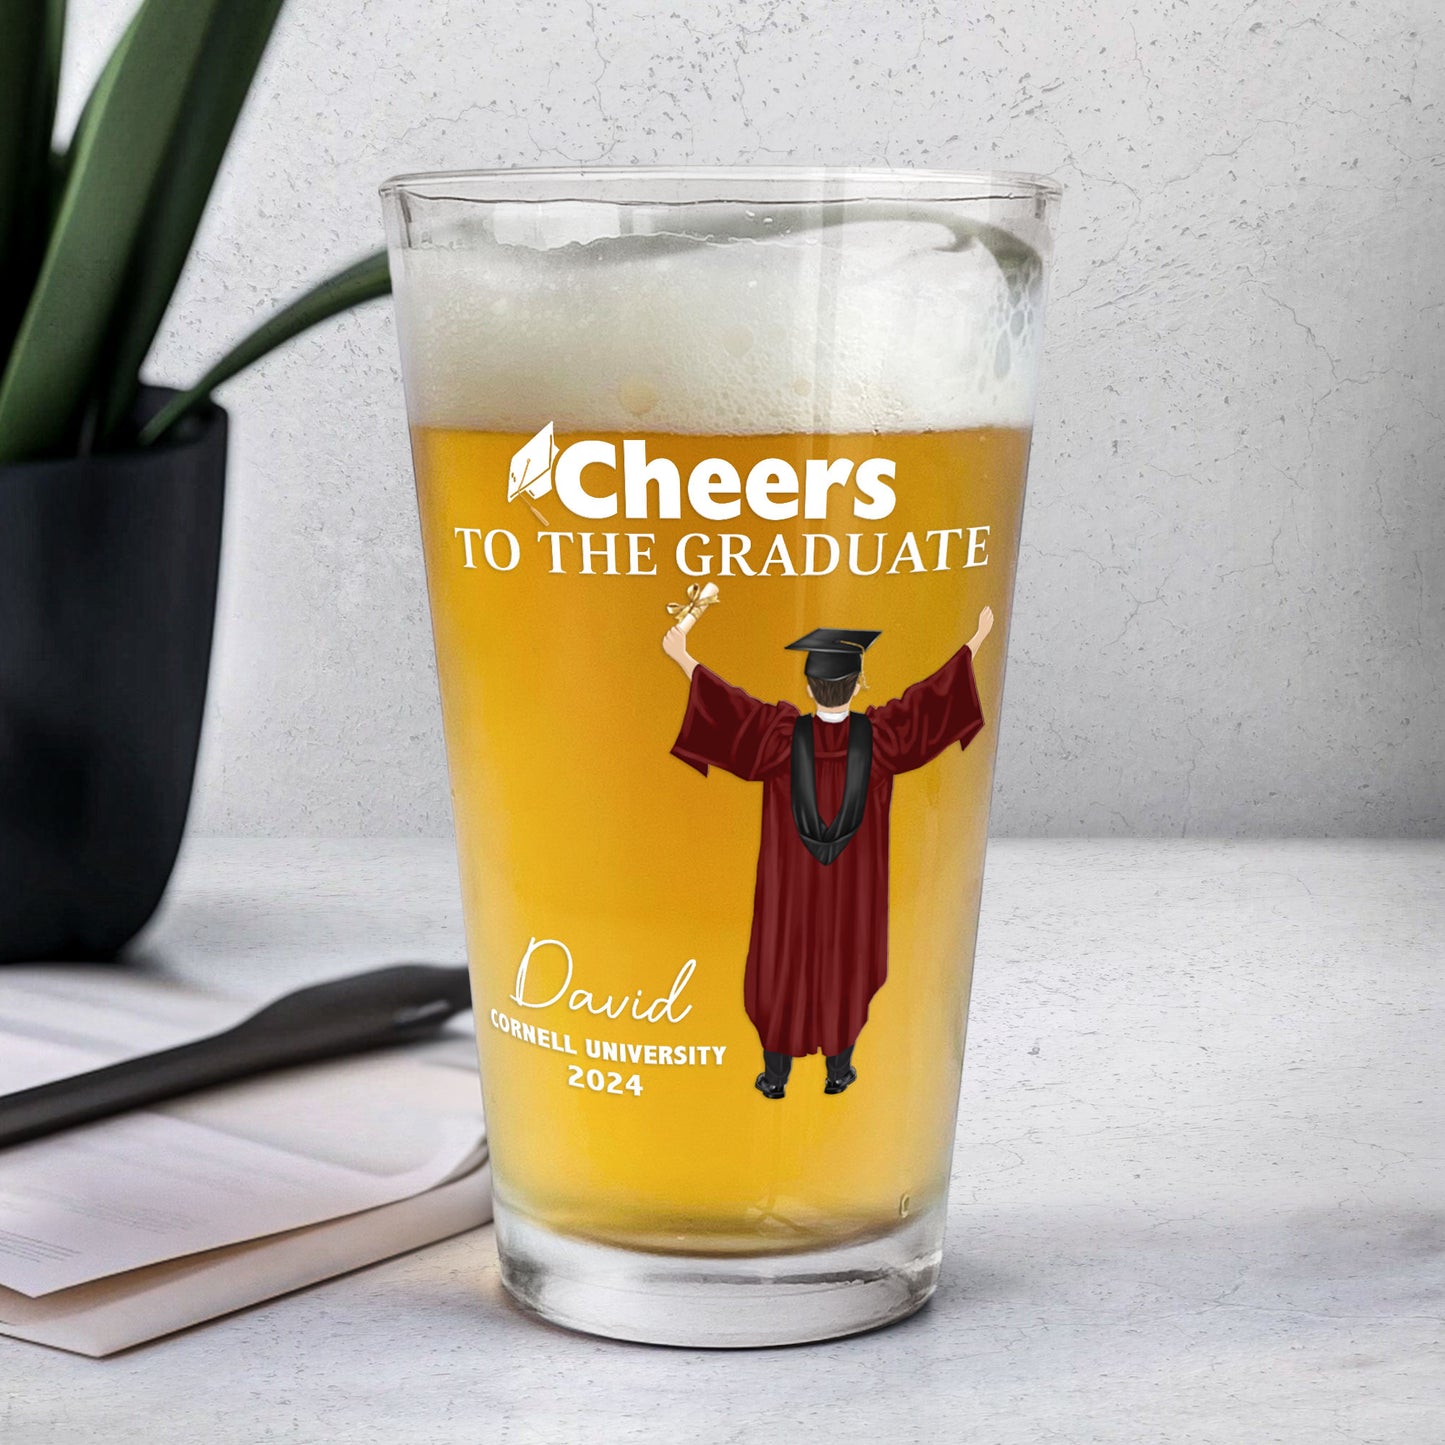 Cheers To The Graduate - Personalized Beer Glass